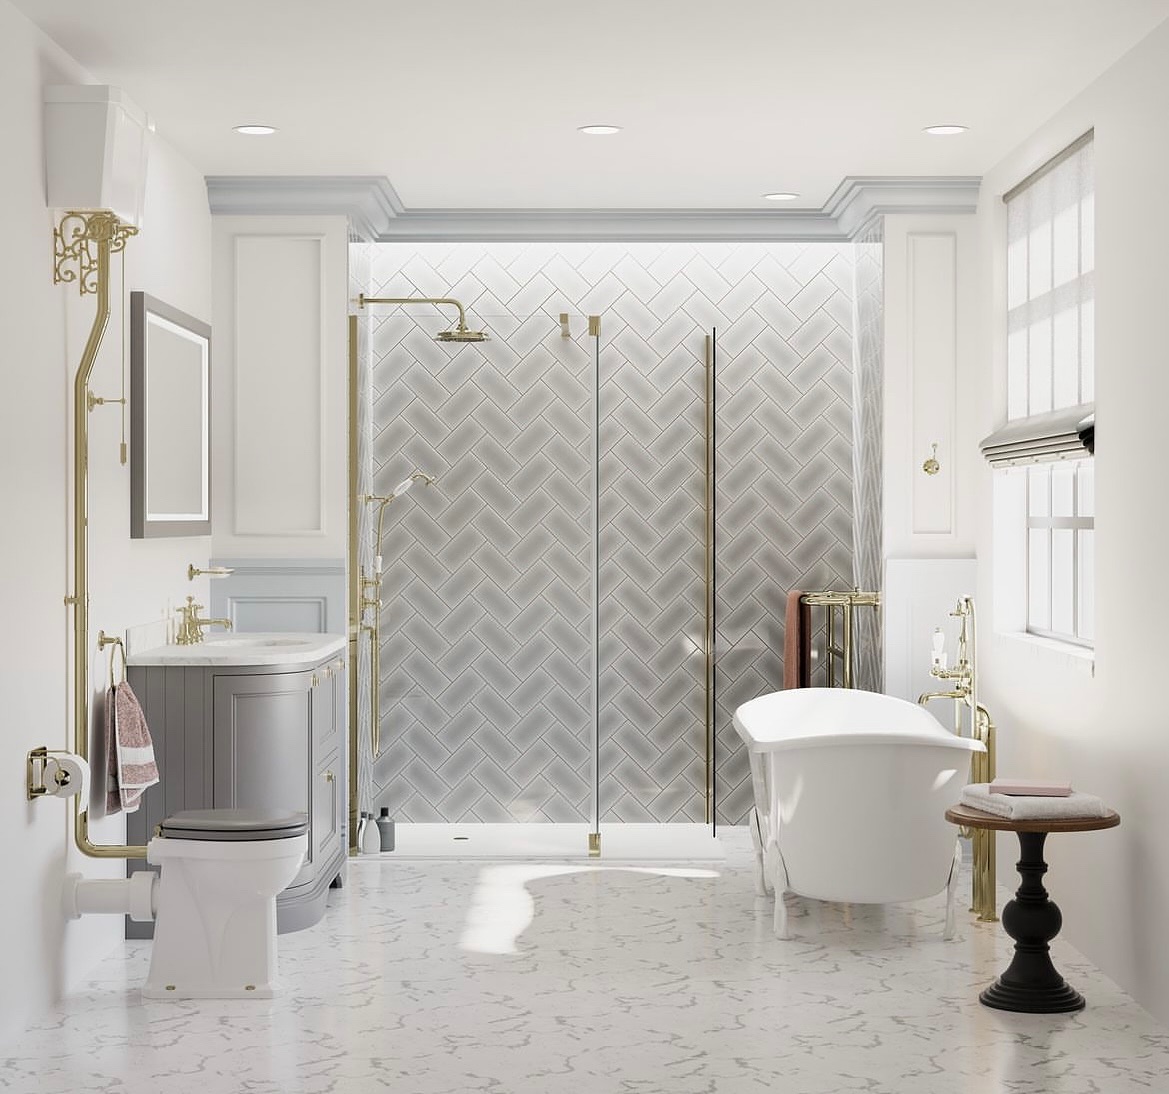 How To Make Your Bathroom A More Comfortable Space In Winter